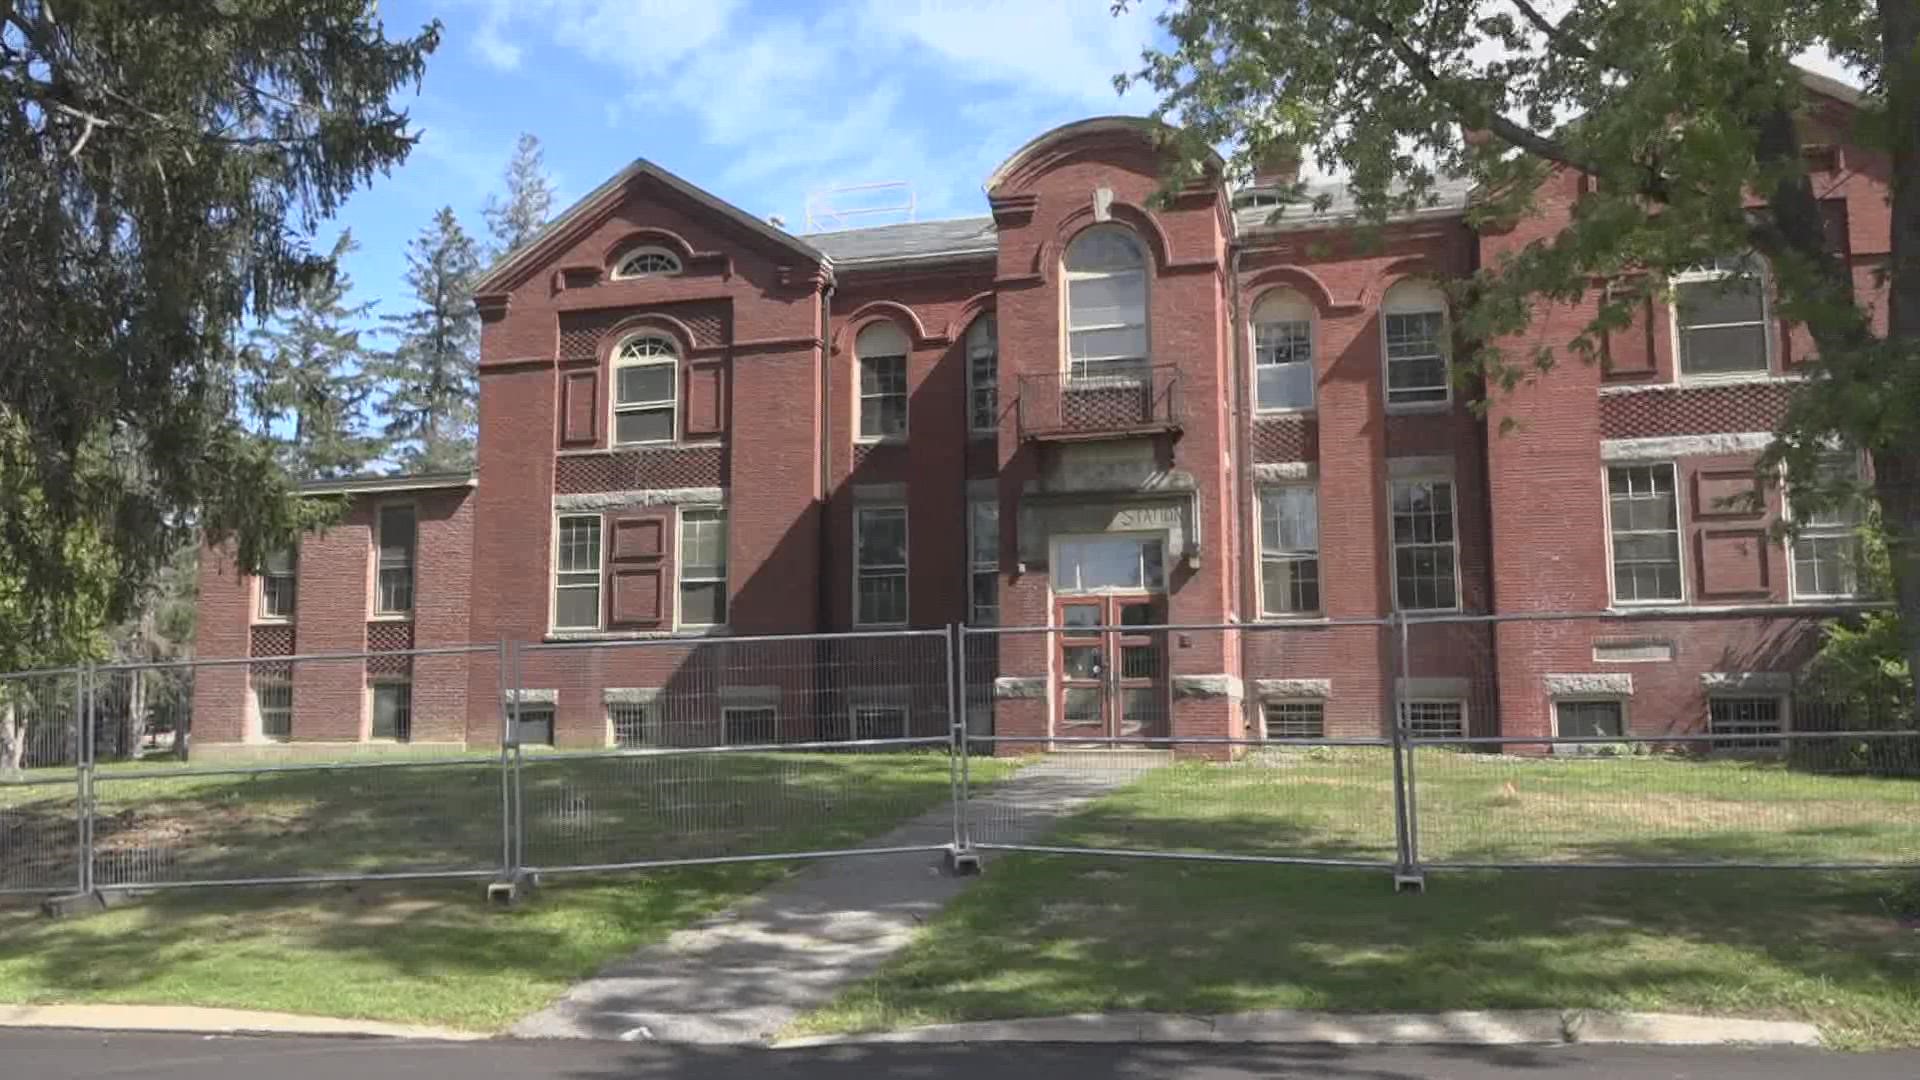 The project is expected to cost about $28 million and will bring life back to the historic Holmes and Coburn halls, which have been vacant for a decade.